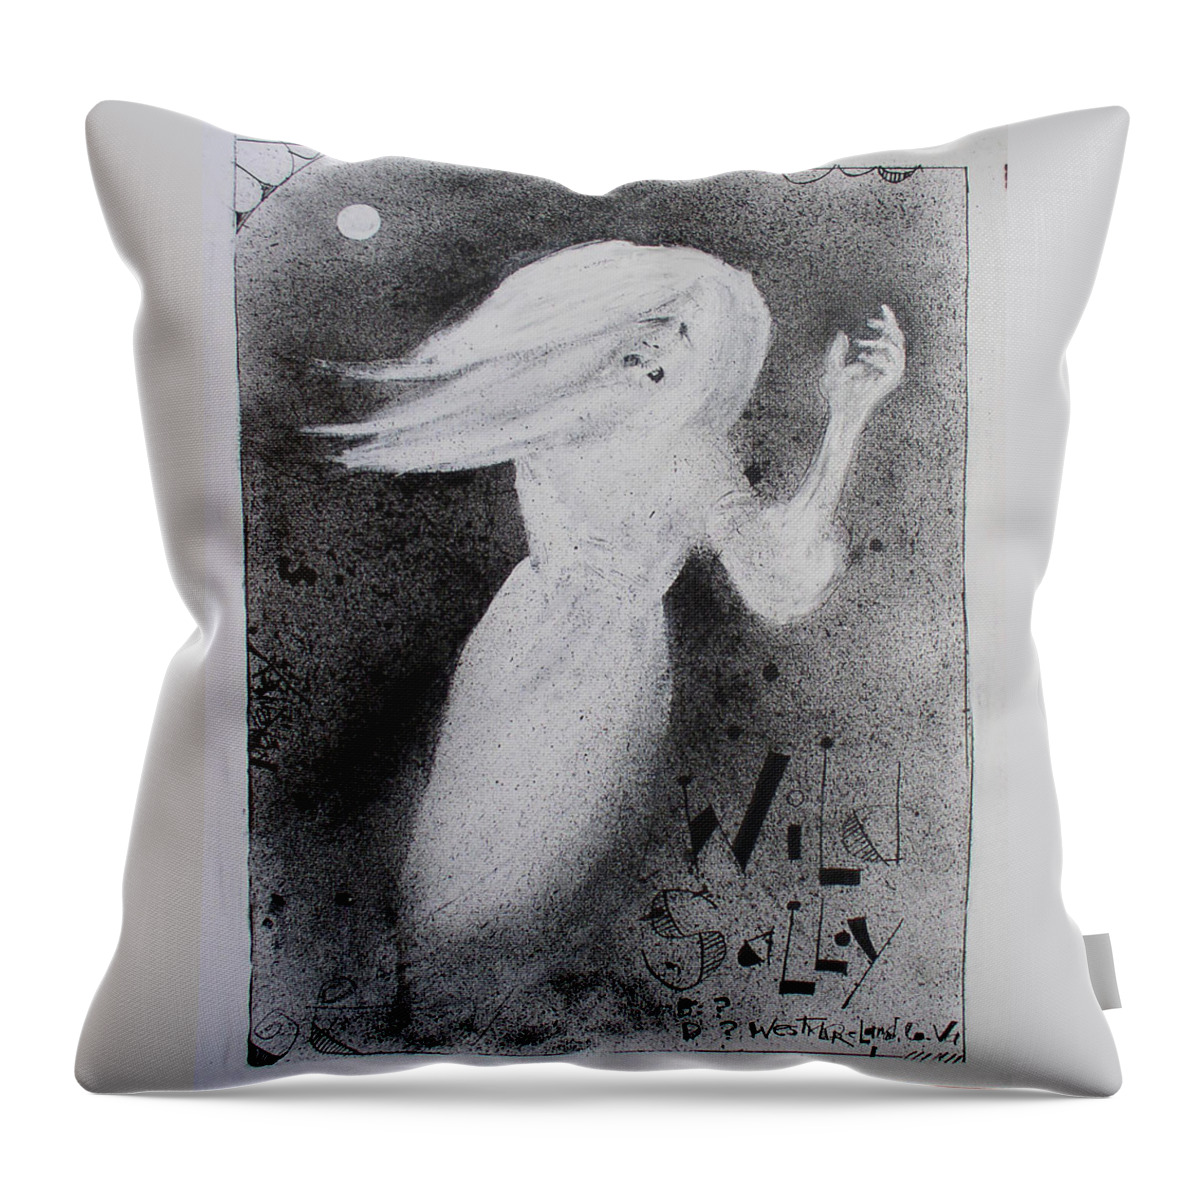  Throw Pillow featuring the drawing Wild Sally by Phil Mckenney